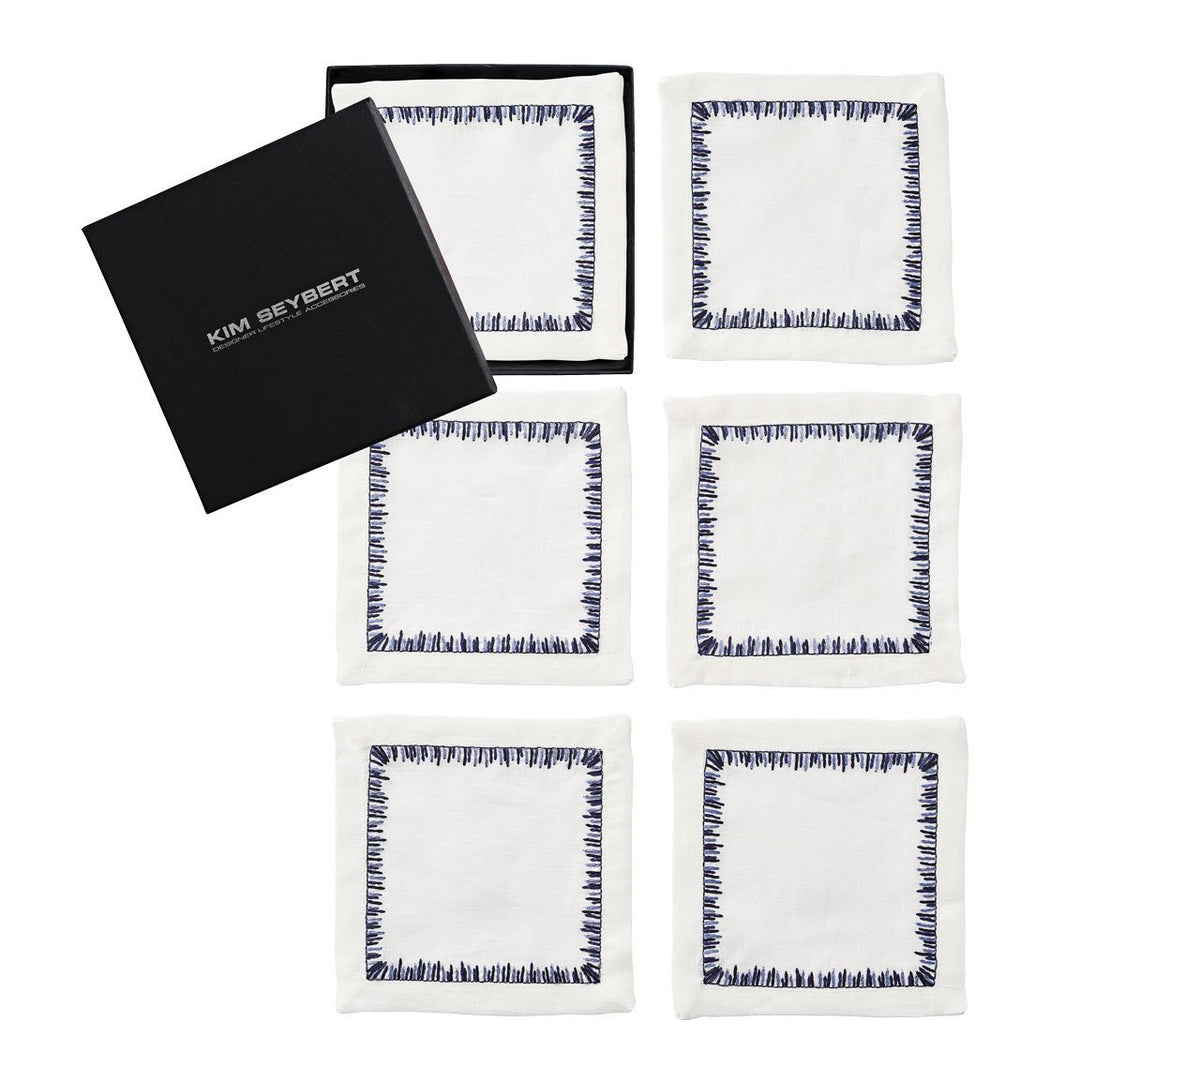 Filament Cocktail Napkins in Navy, Set of 6 in a Gift Box by Kim Seybert